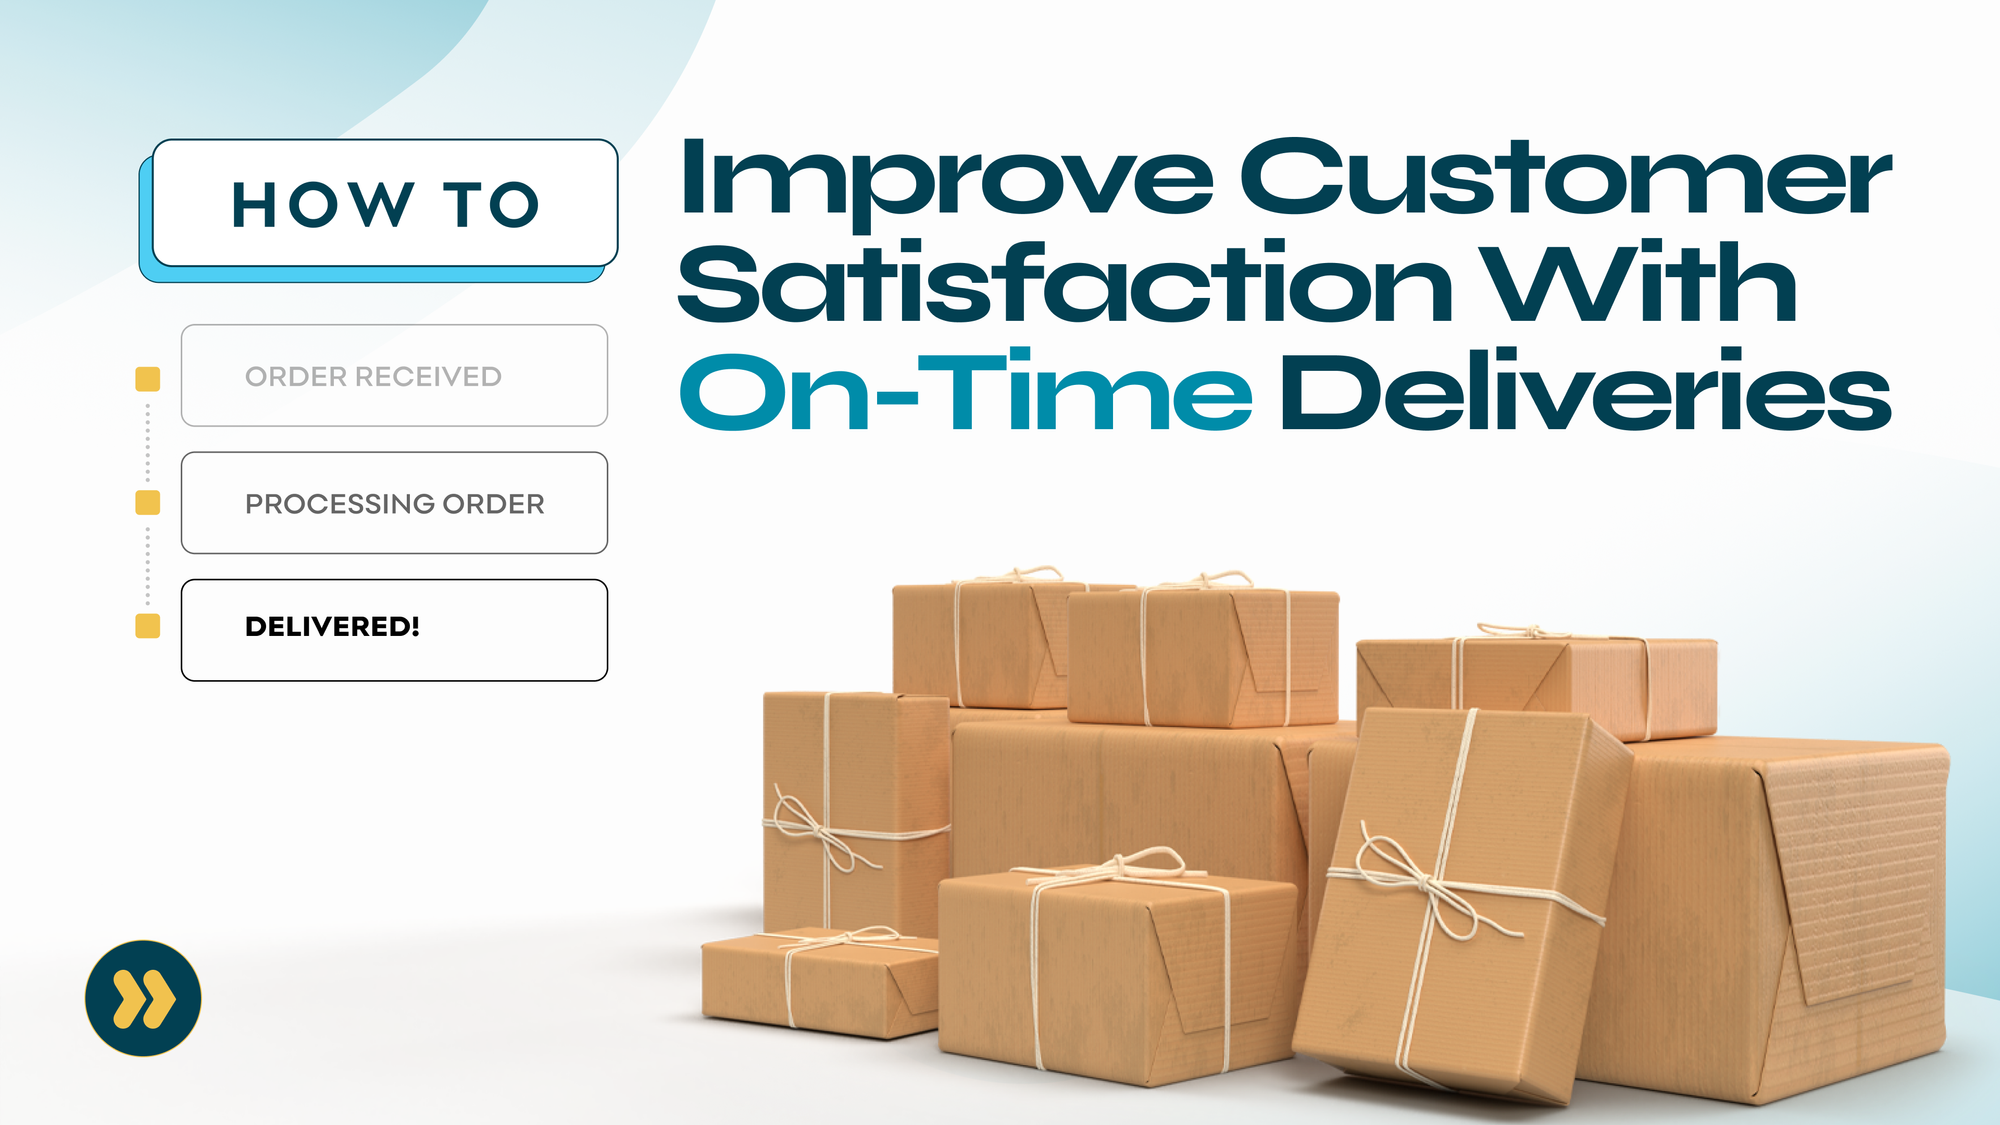 How to Improve Customer Satisfaction with On-Time Deliveries